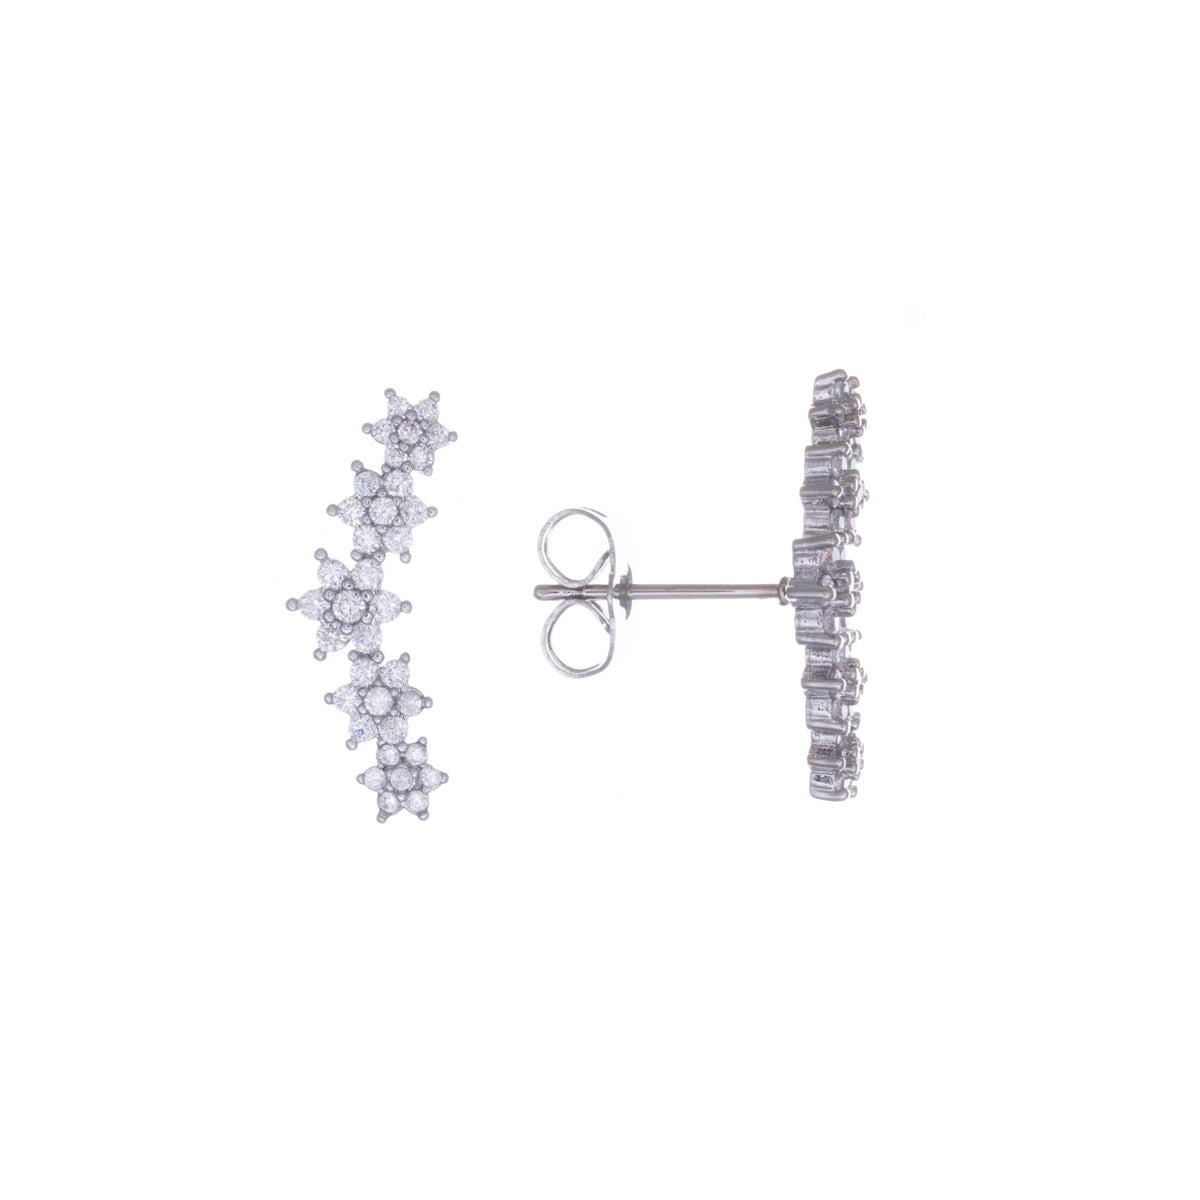 Curved star cluster earrings with zirconia stones